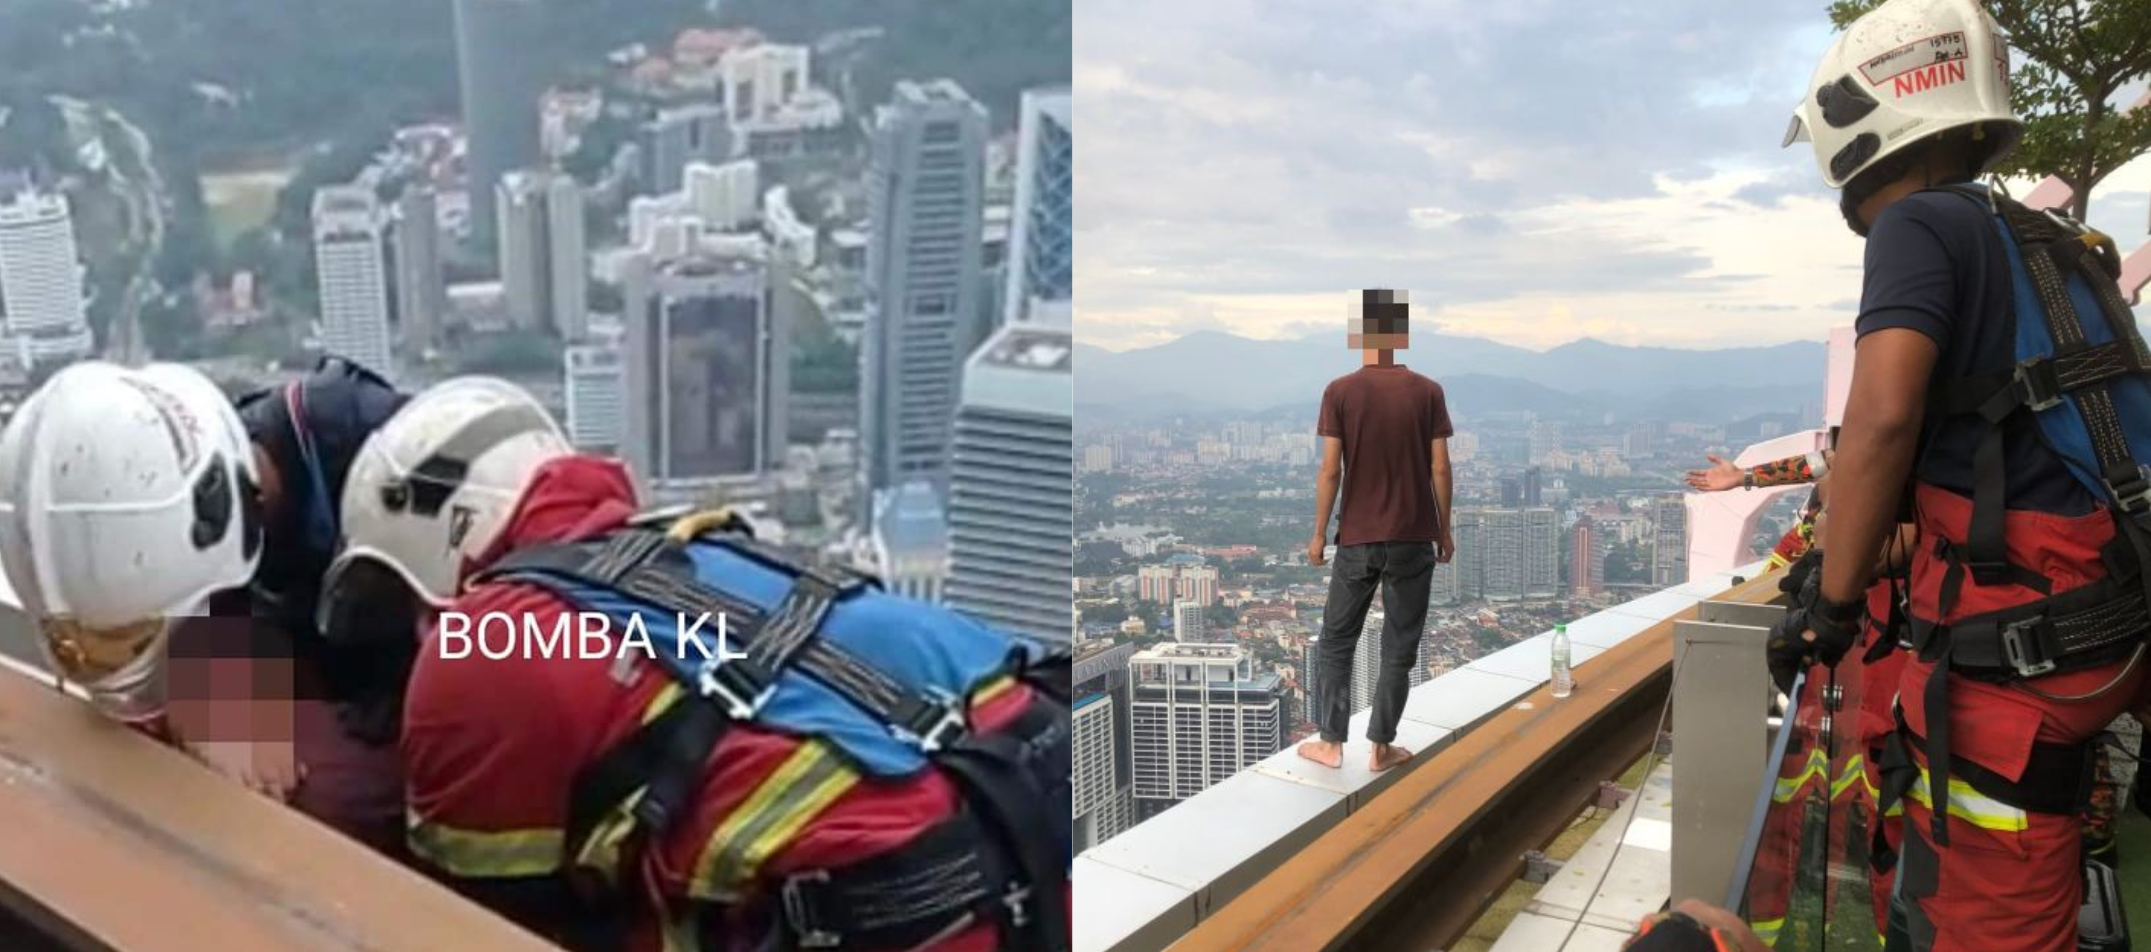 Young Man Rescued By Bomba After Attempts To Suicide From KL Tower